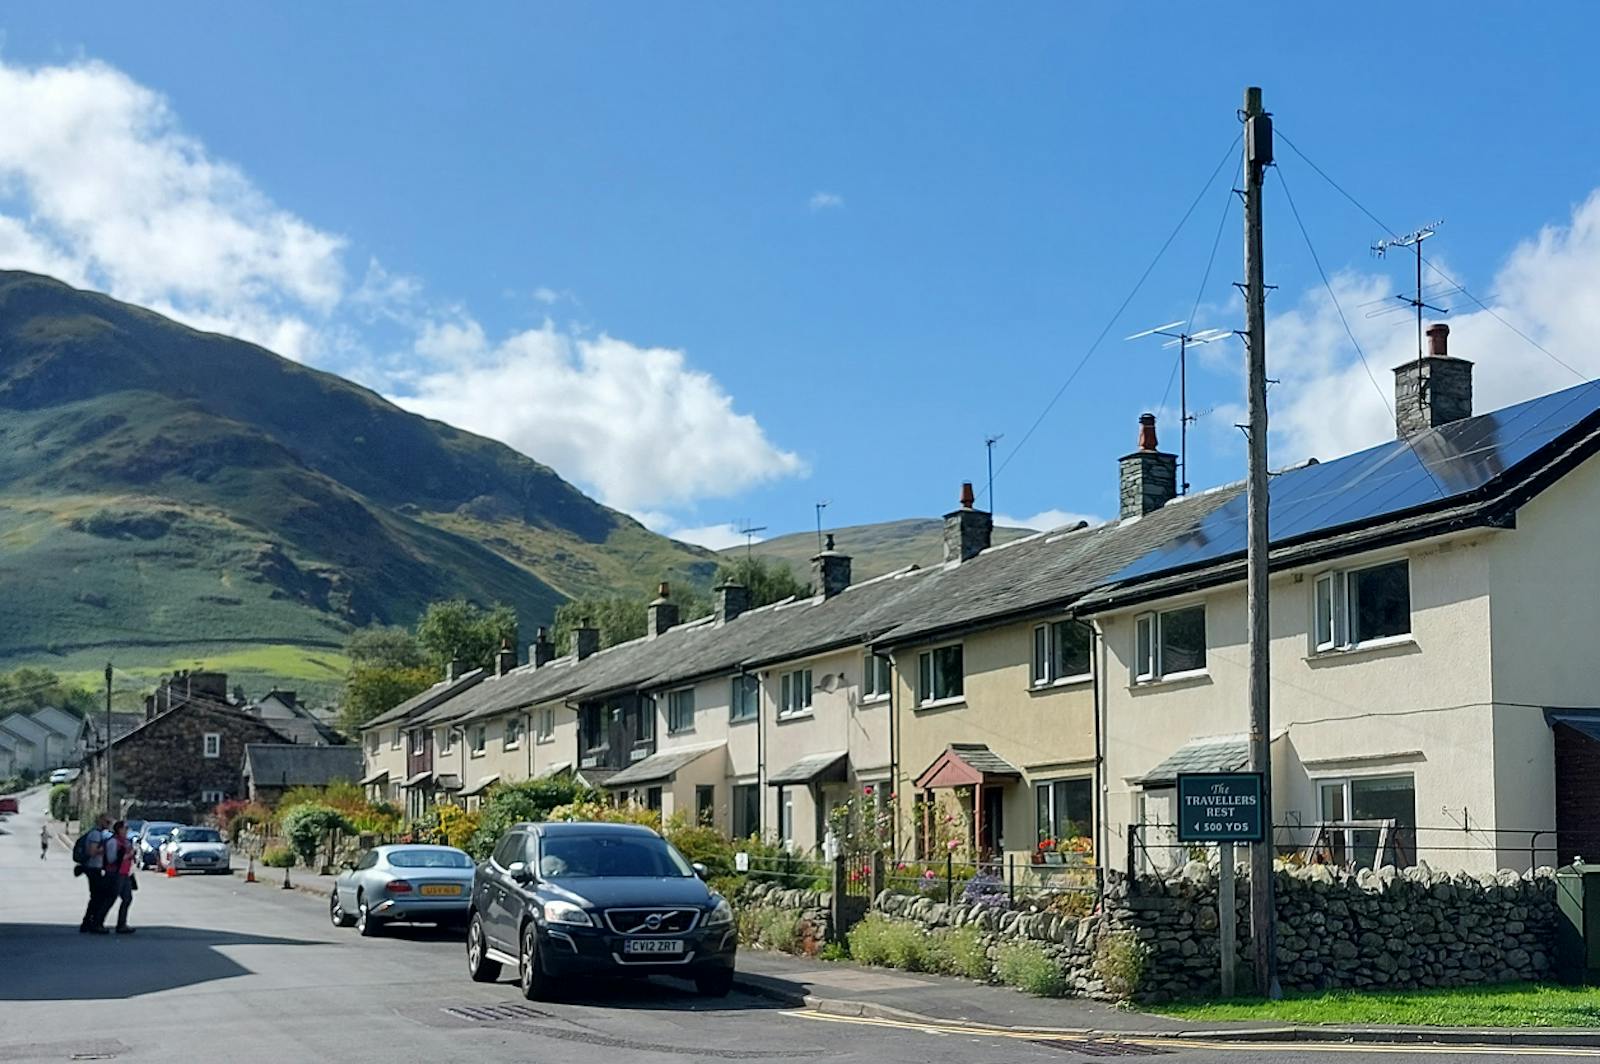 Row of houses on a road with cars and mountain behind